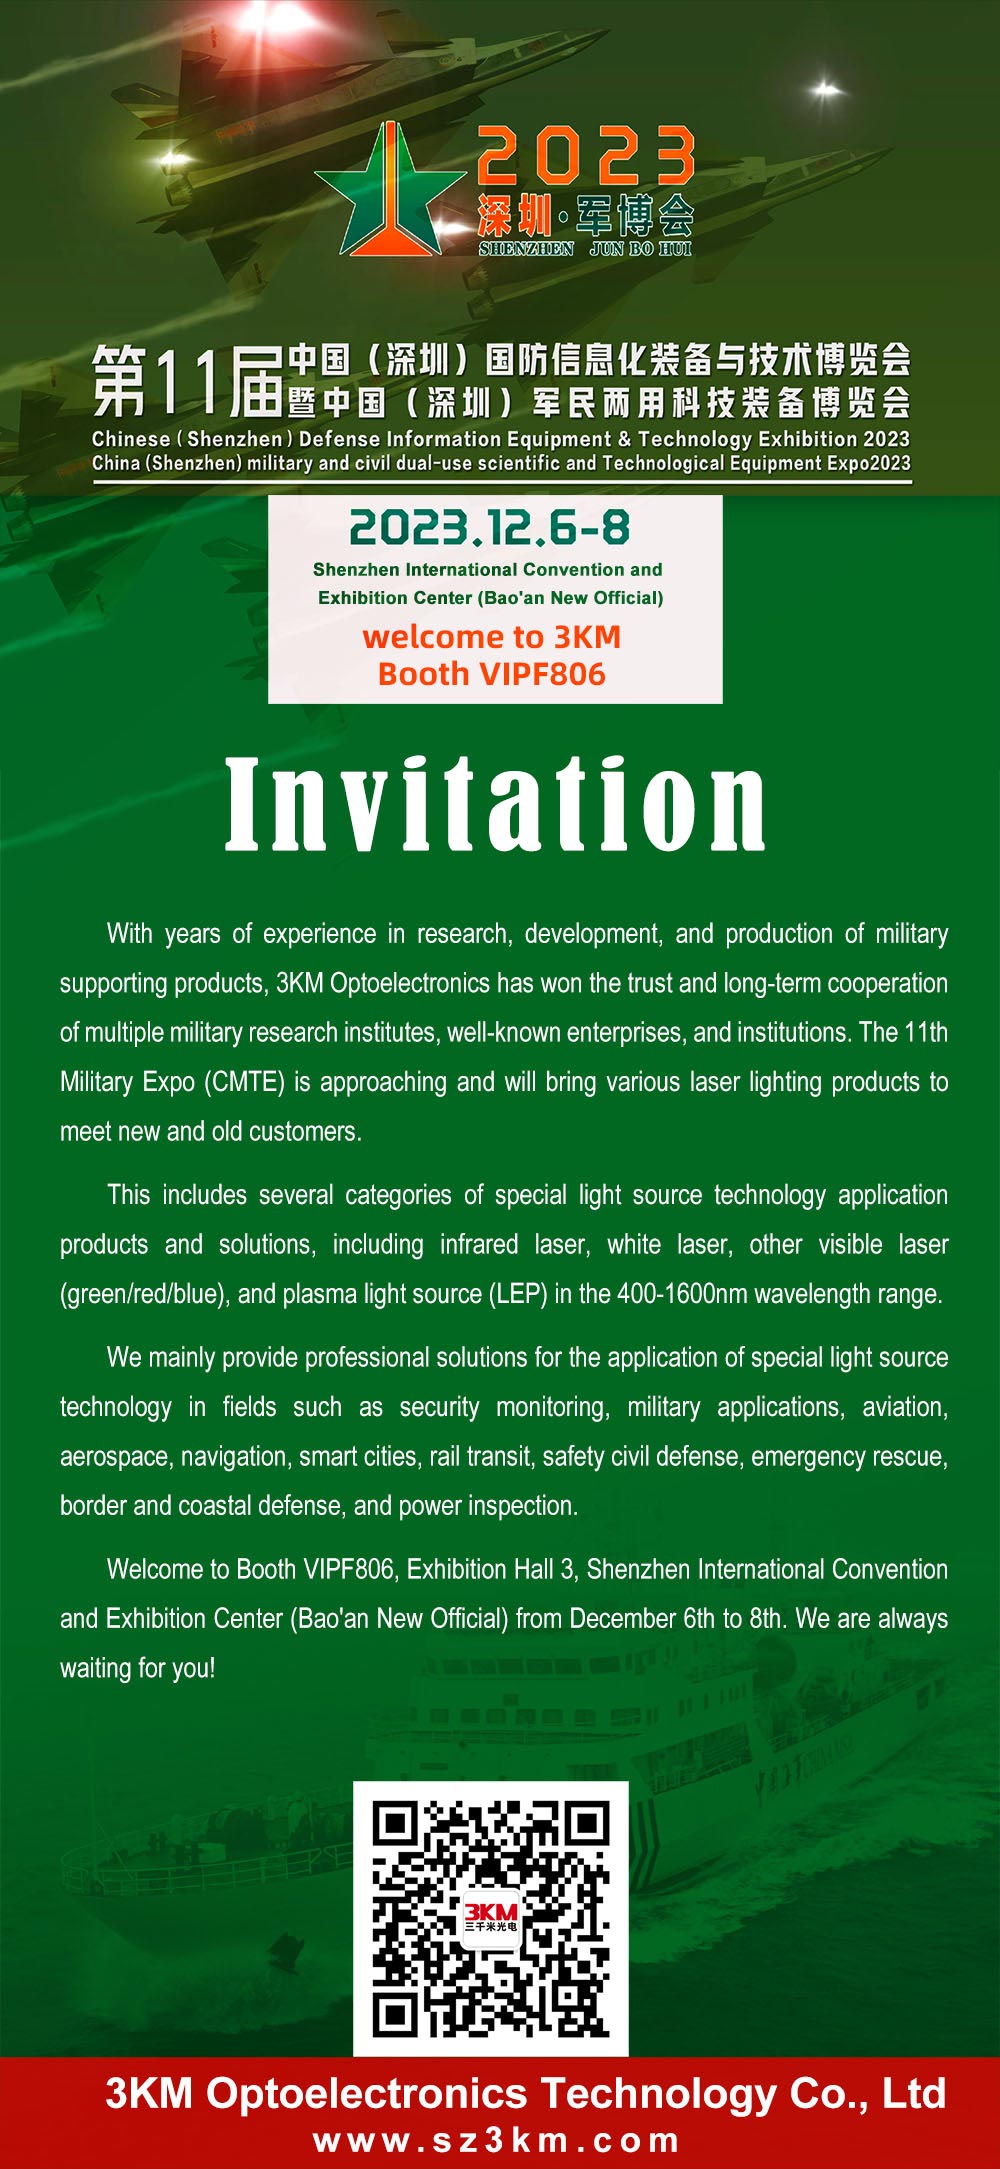 welcome to 3KM Booth VIPF806 of The 11th Military Expo (CMTE)